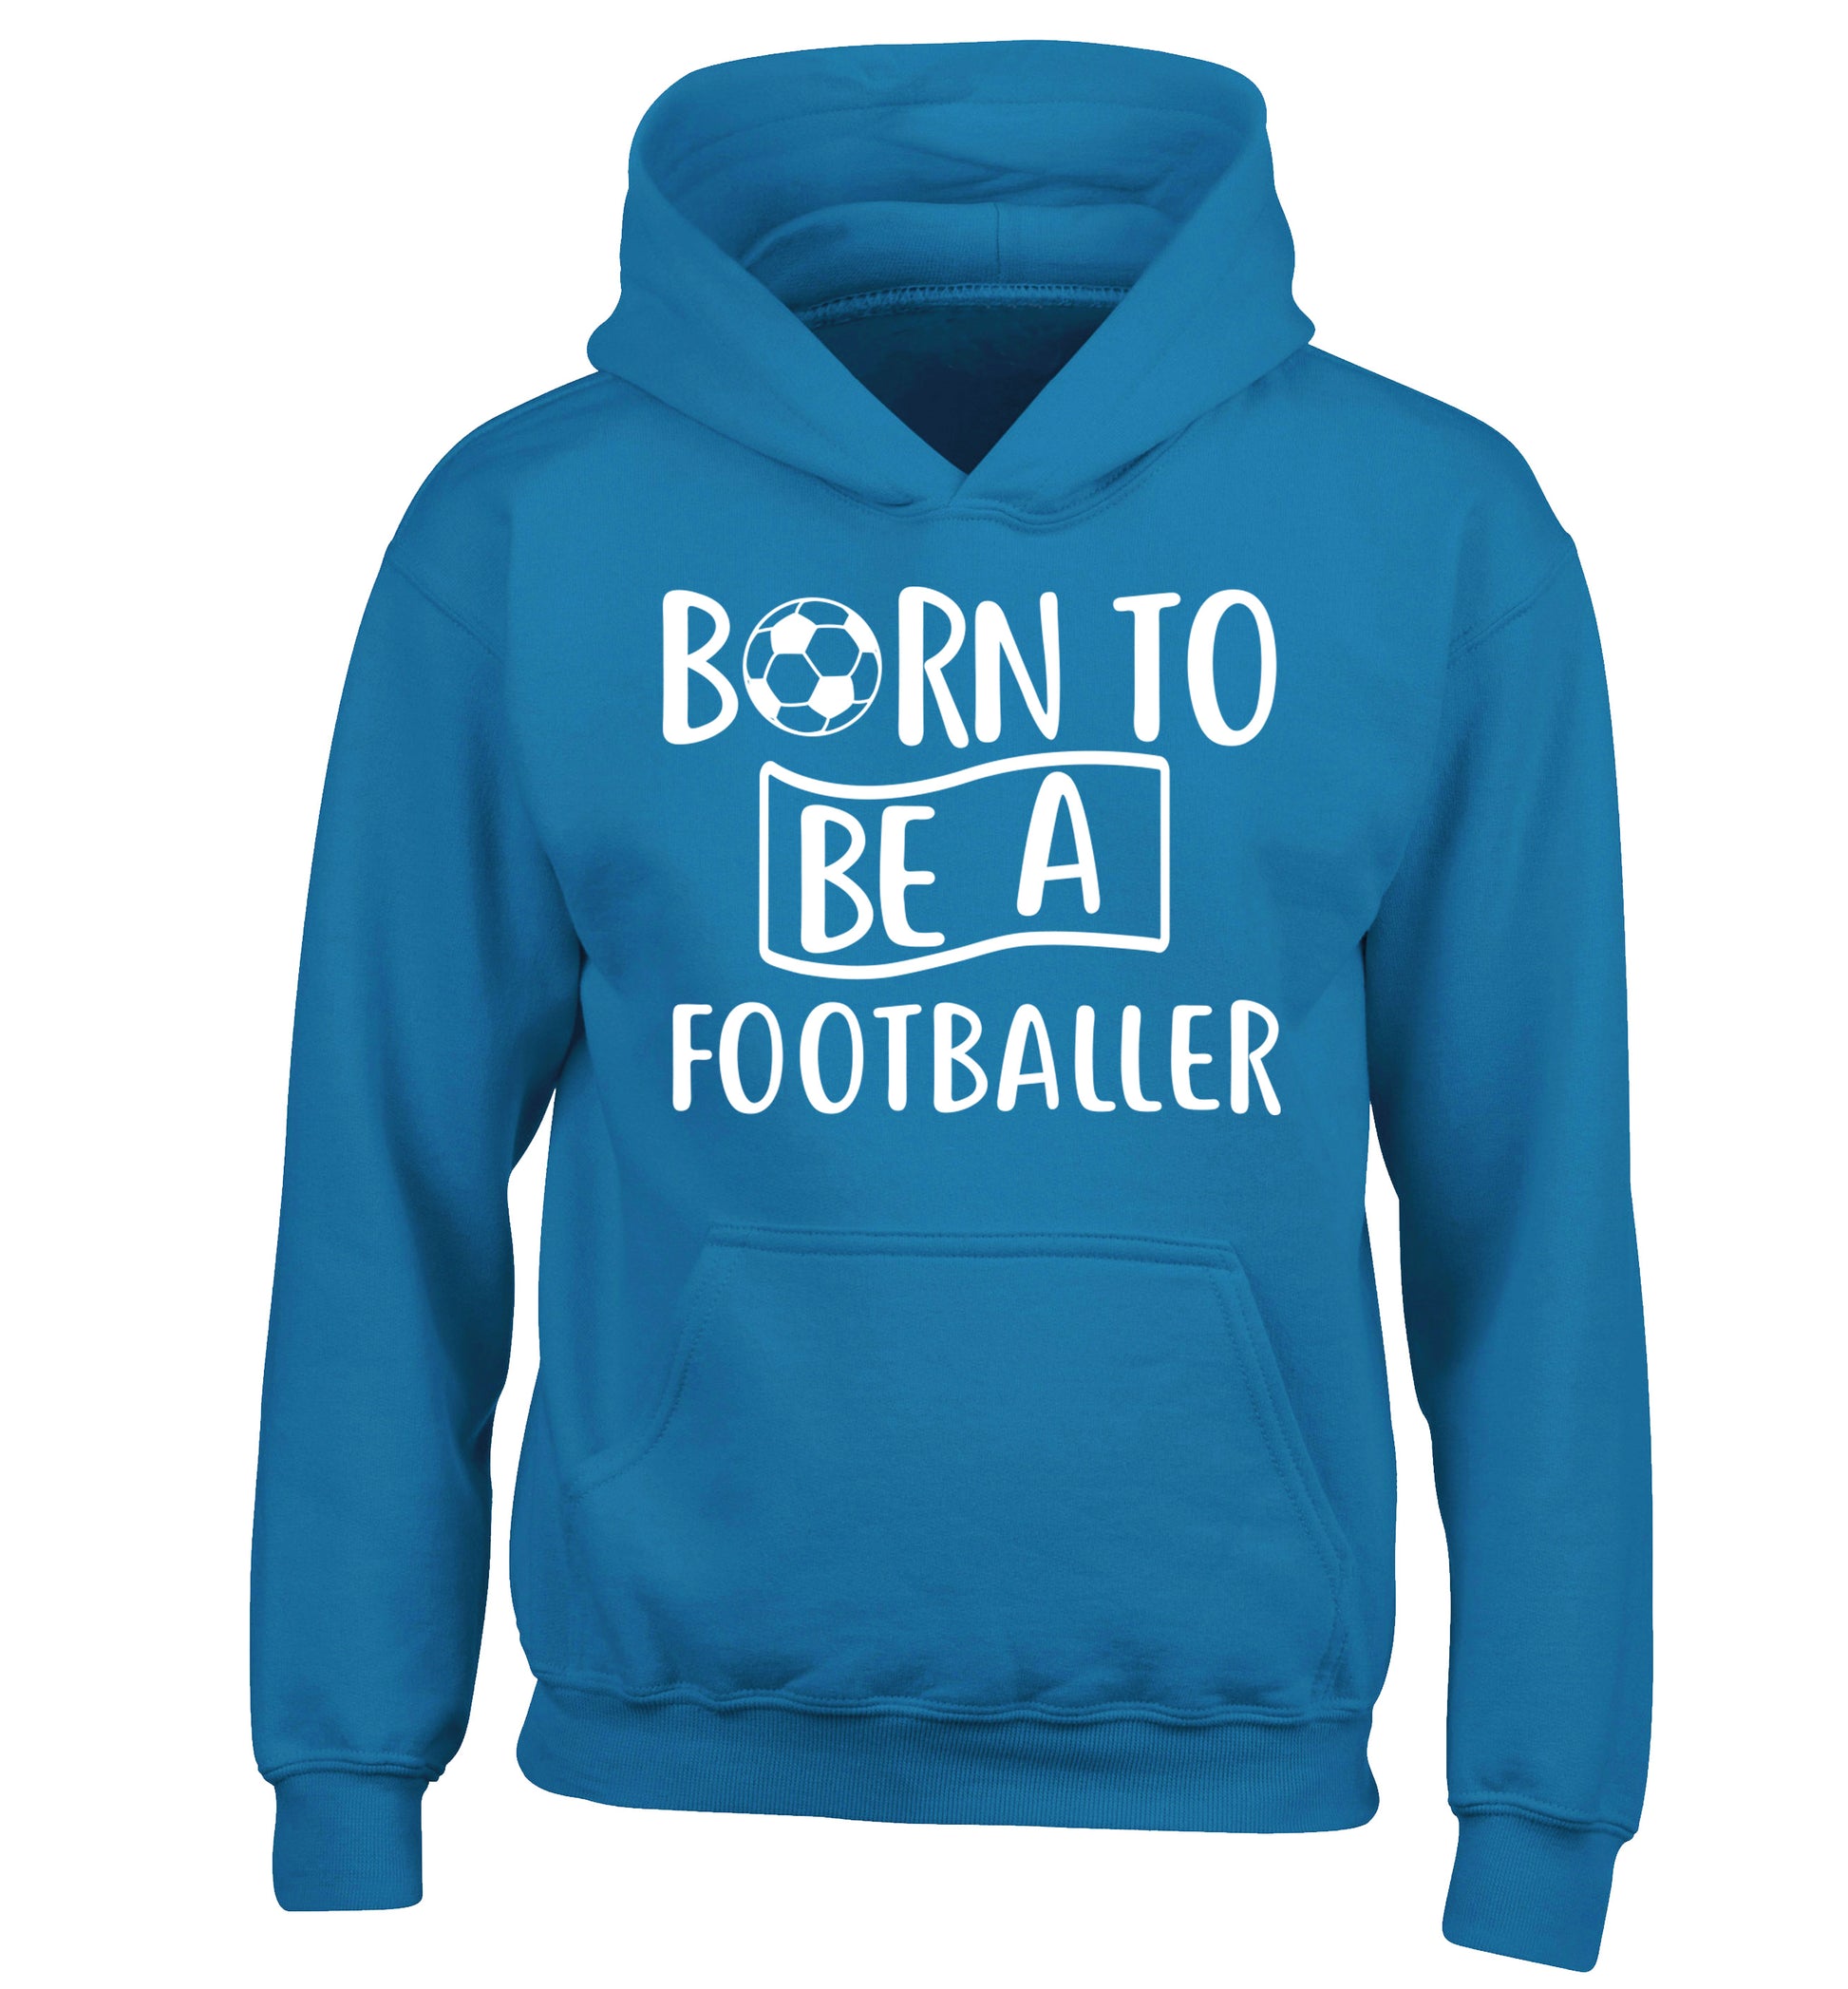 Born to be a footballer children's blue hoodie 12-14 Years